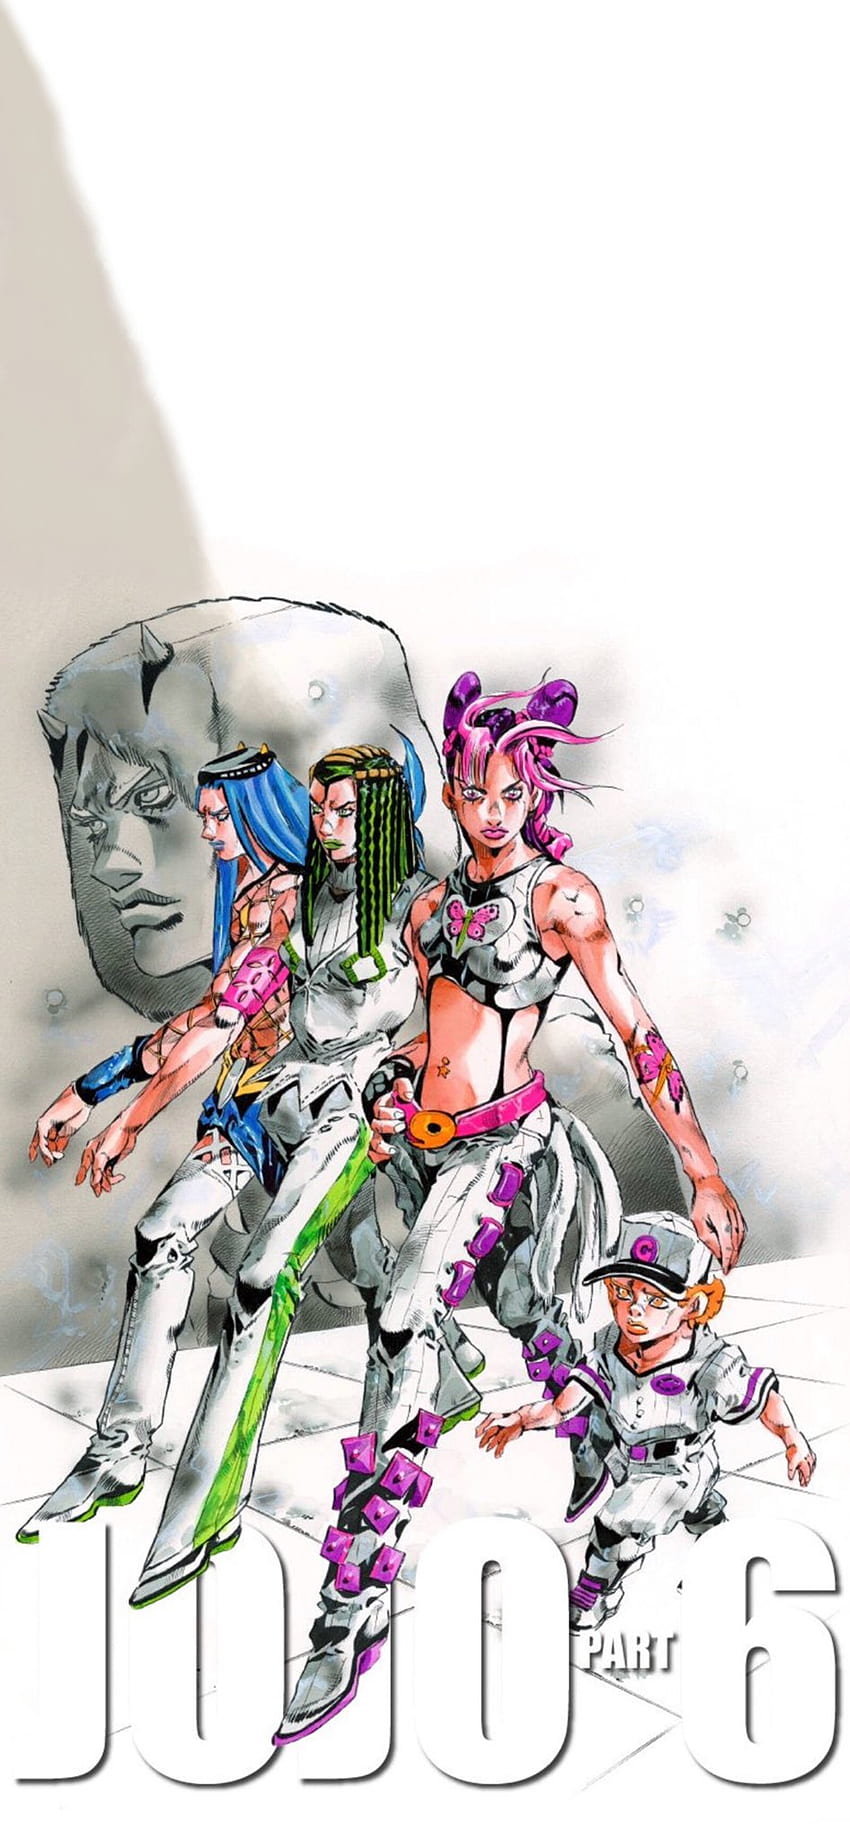 I made a Stone Ocean phone wallpaper to celebrate the end of JoJos part 6   rStardustCrusaders